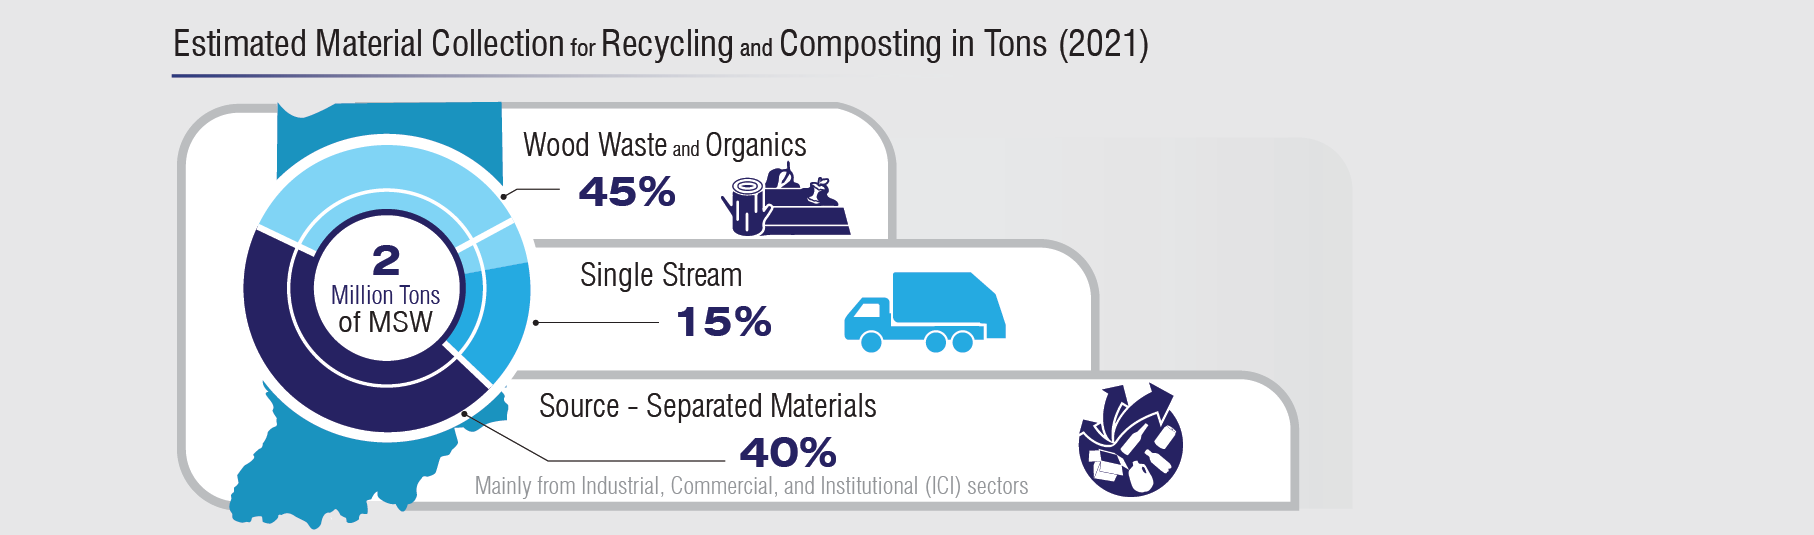 image of estimated recycling and composting collection amounts for Indiana